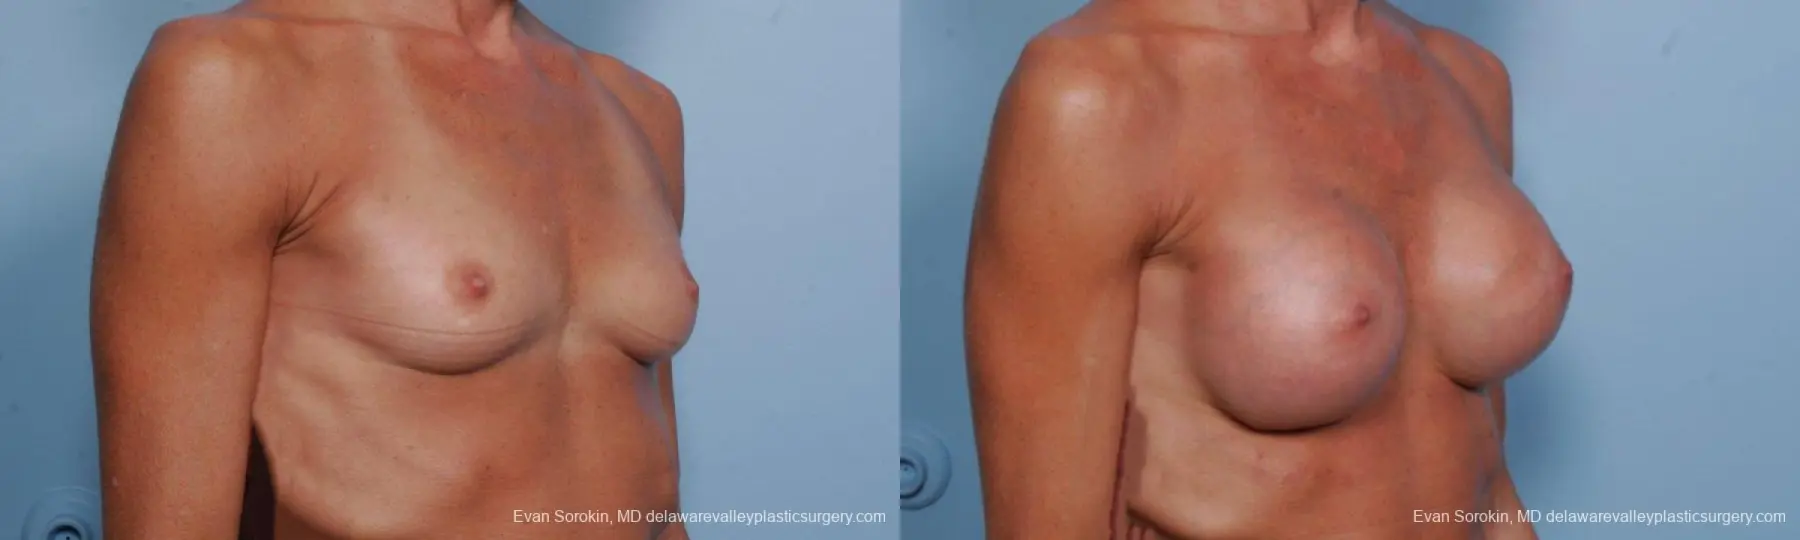 Philadelphia Breast Augmentation 8656 - Before and After 2